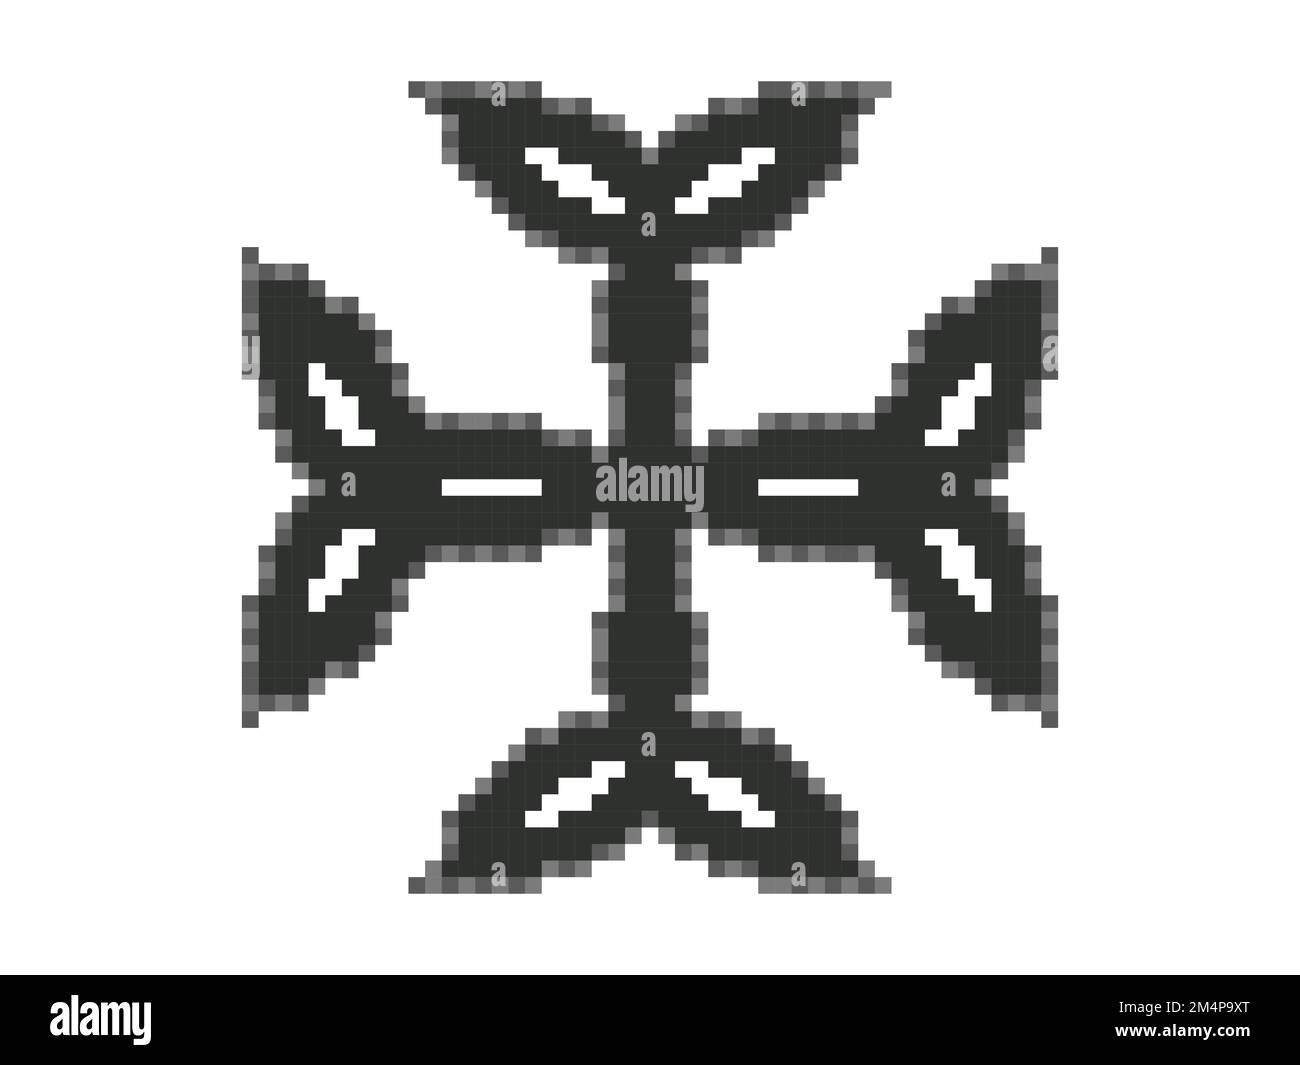 Carolingian cross in pixel style. Pixelated Carolingian cross. Celtic knot. Style of 8-bit retro games from the 80s and 90s. Design for app, banner an Stock Vector